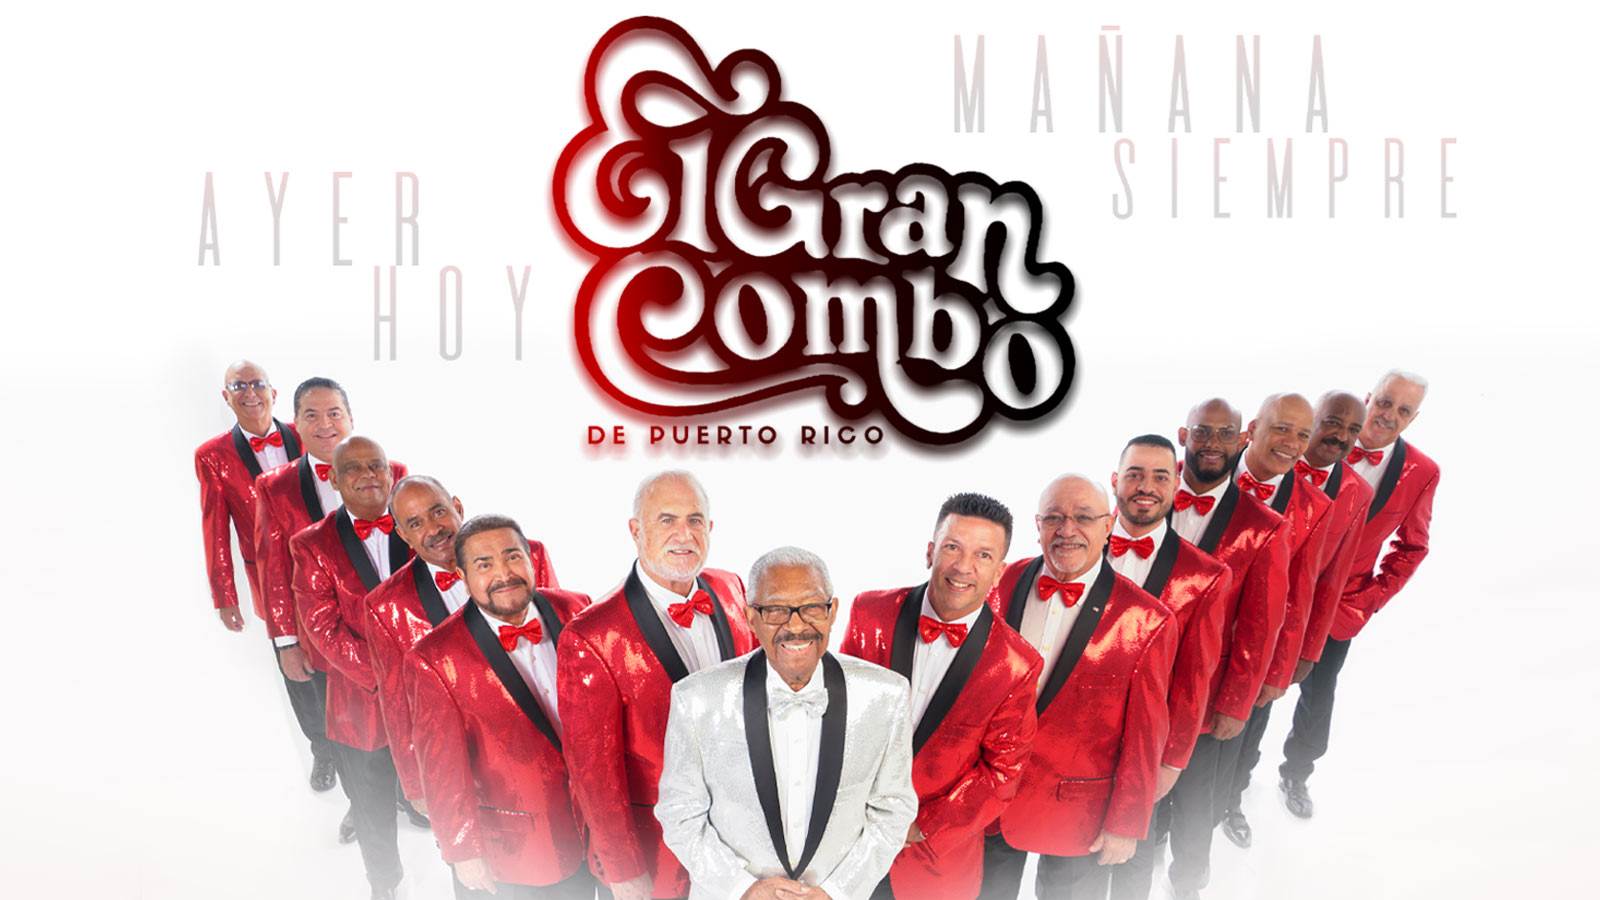 Photo of El Grand Combo wearing red suits with band leader wearing a white suit in the middle. El Grand Combo title treatment is above them.